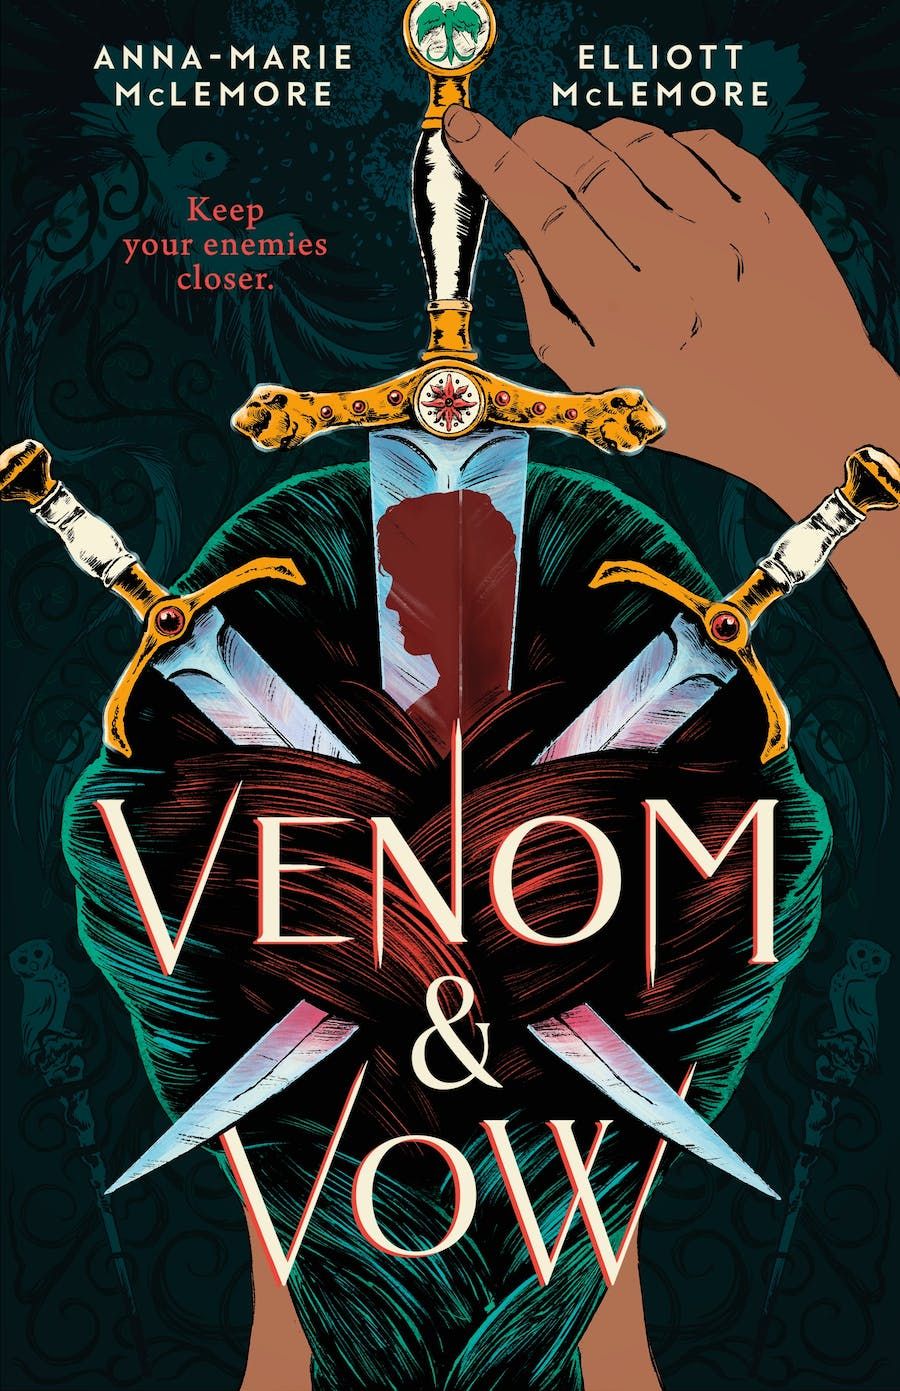 Venom & Vow by Anna-Marie McLemore and Elliott McLemore book cover